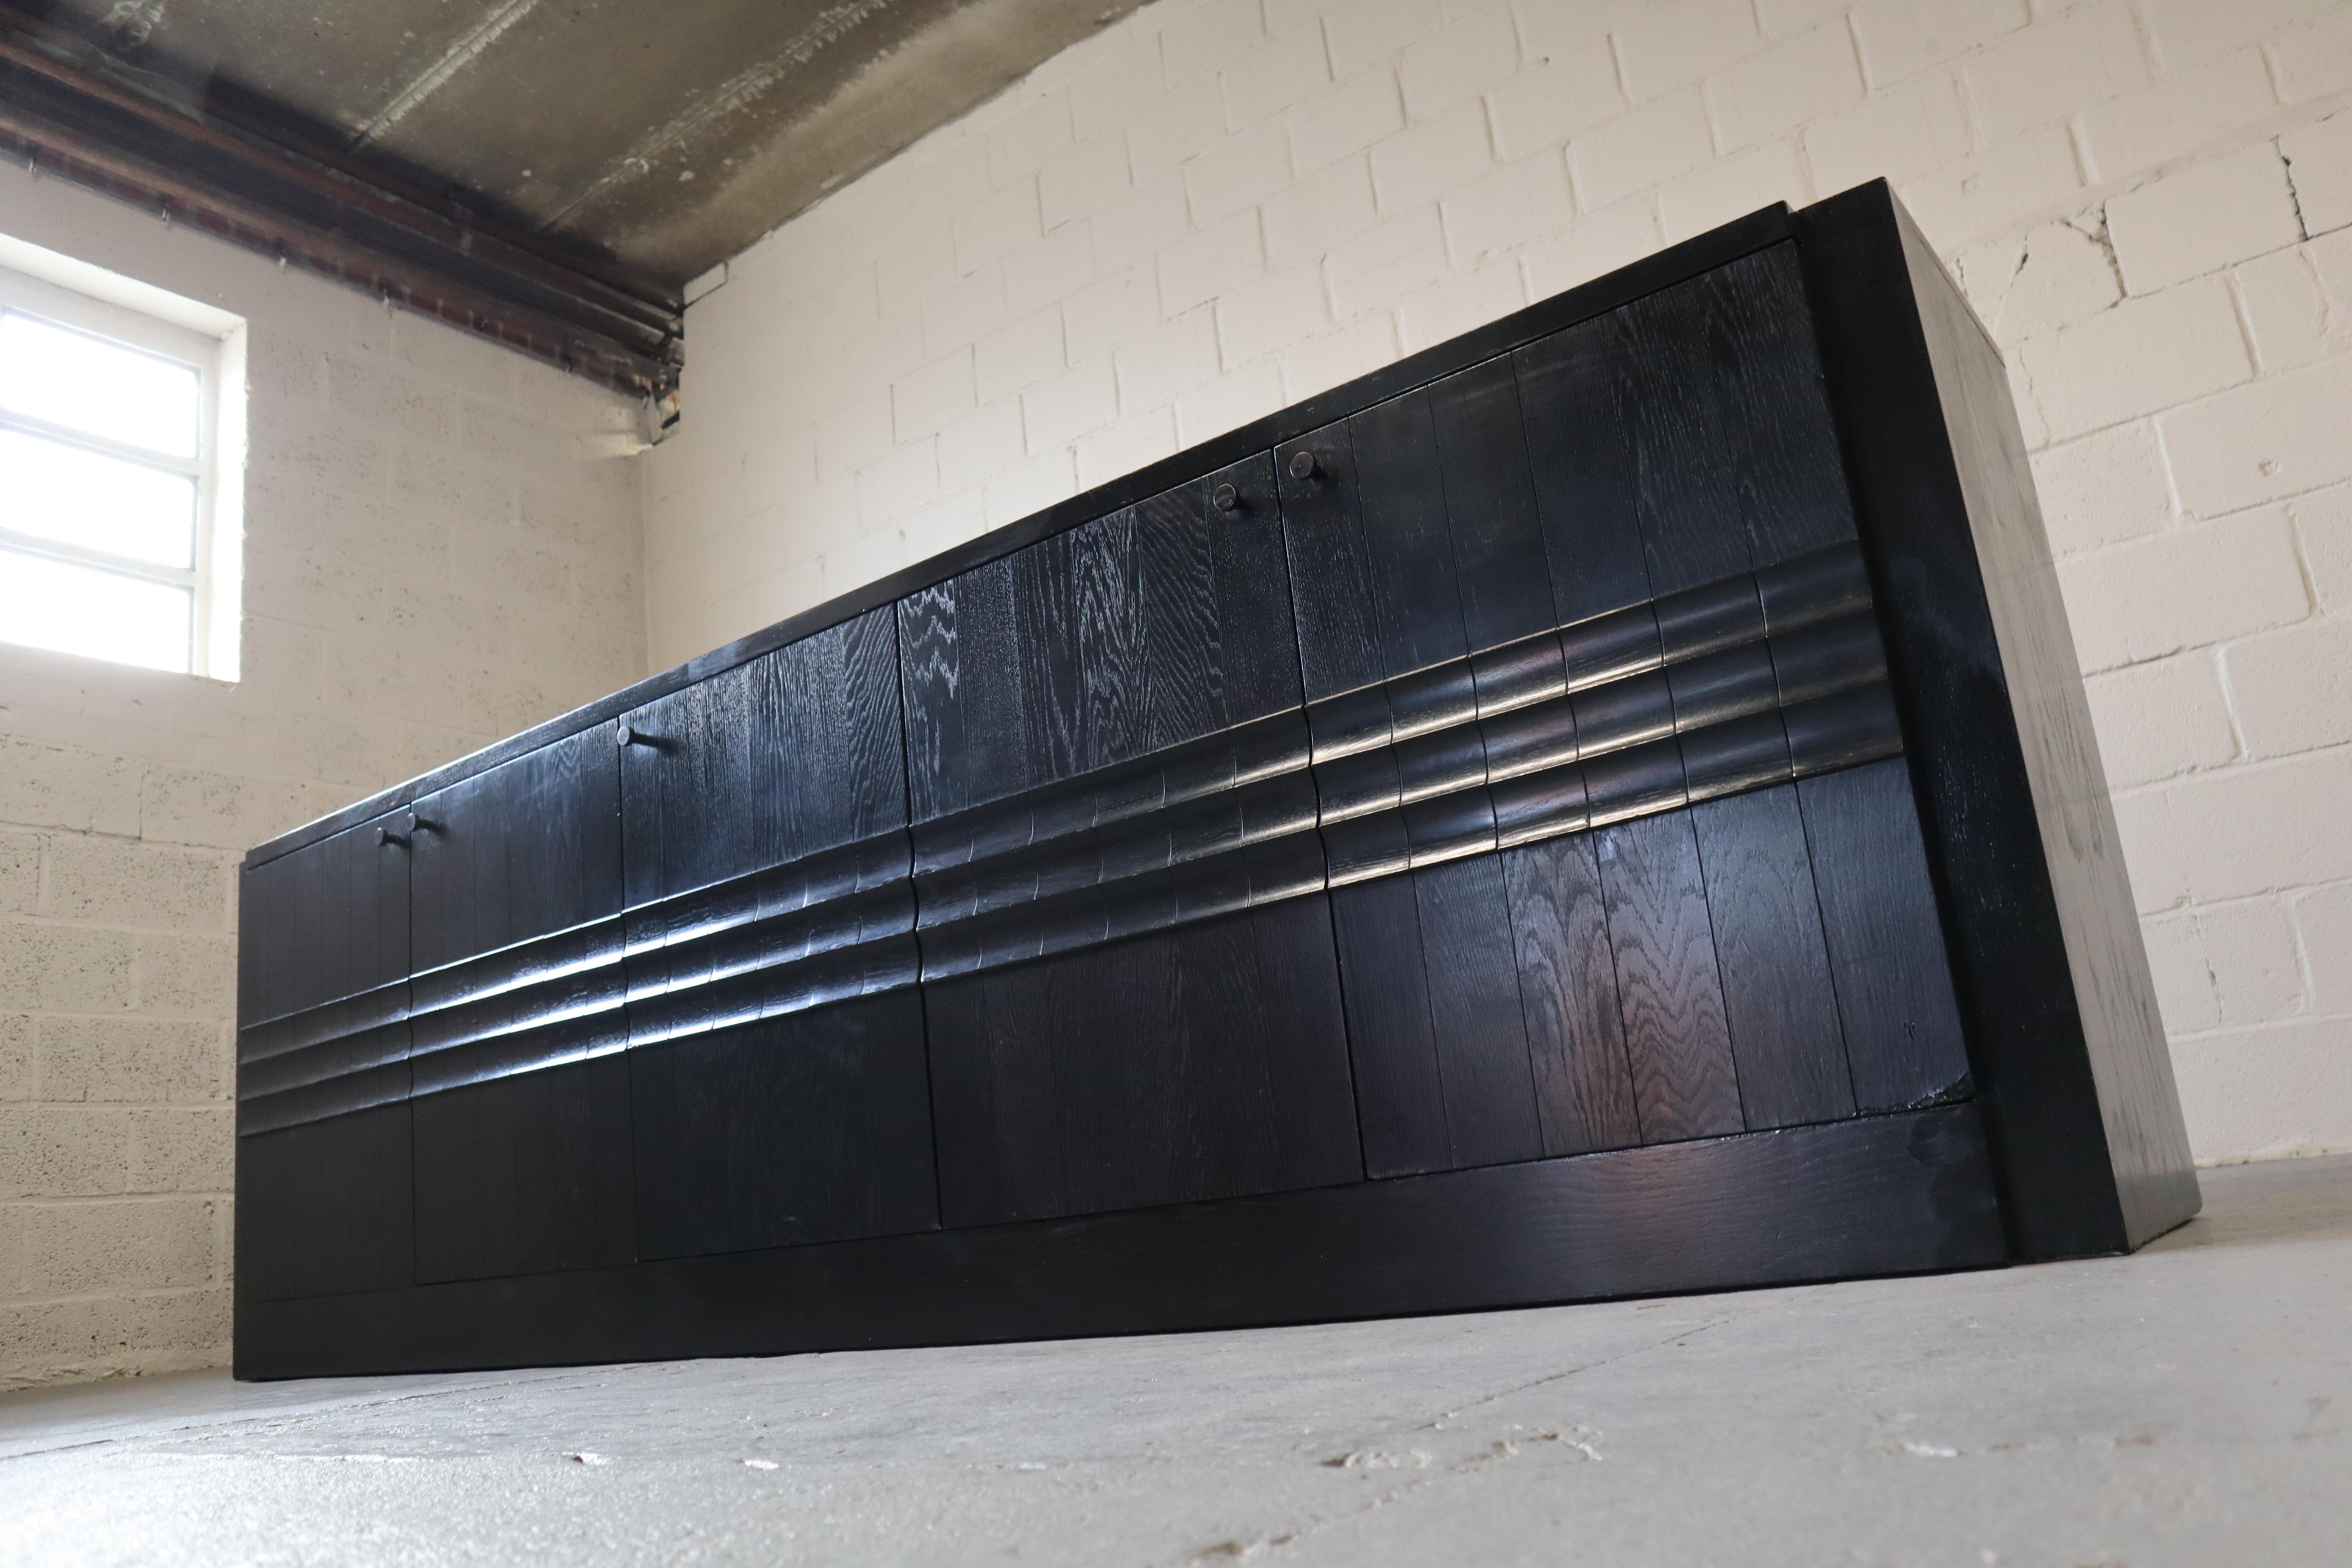 Brutalist ebonized sideboard with five graphical door panels, 1970's.
Ebonized Oak veneer!

The sideboard has a lot of storage space and features 5 doors and 2 drawers